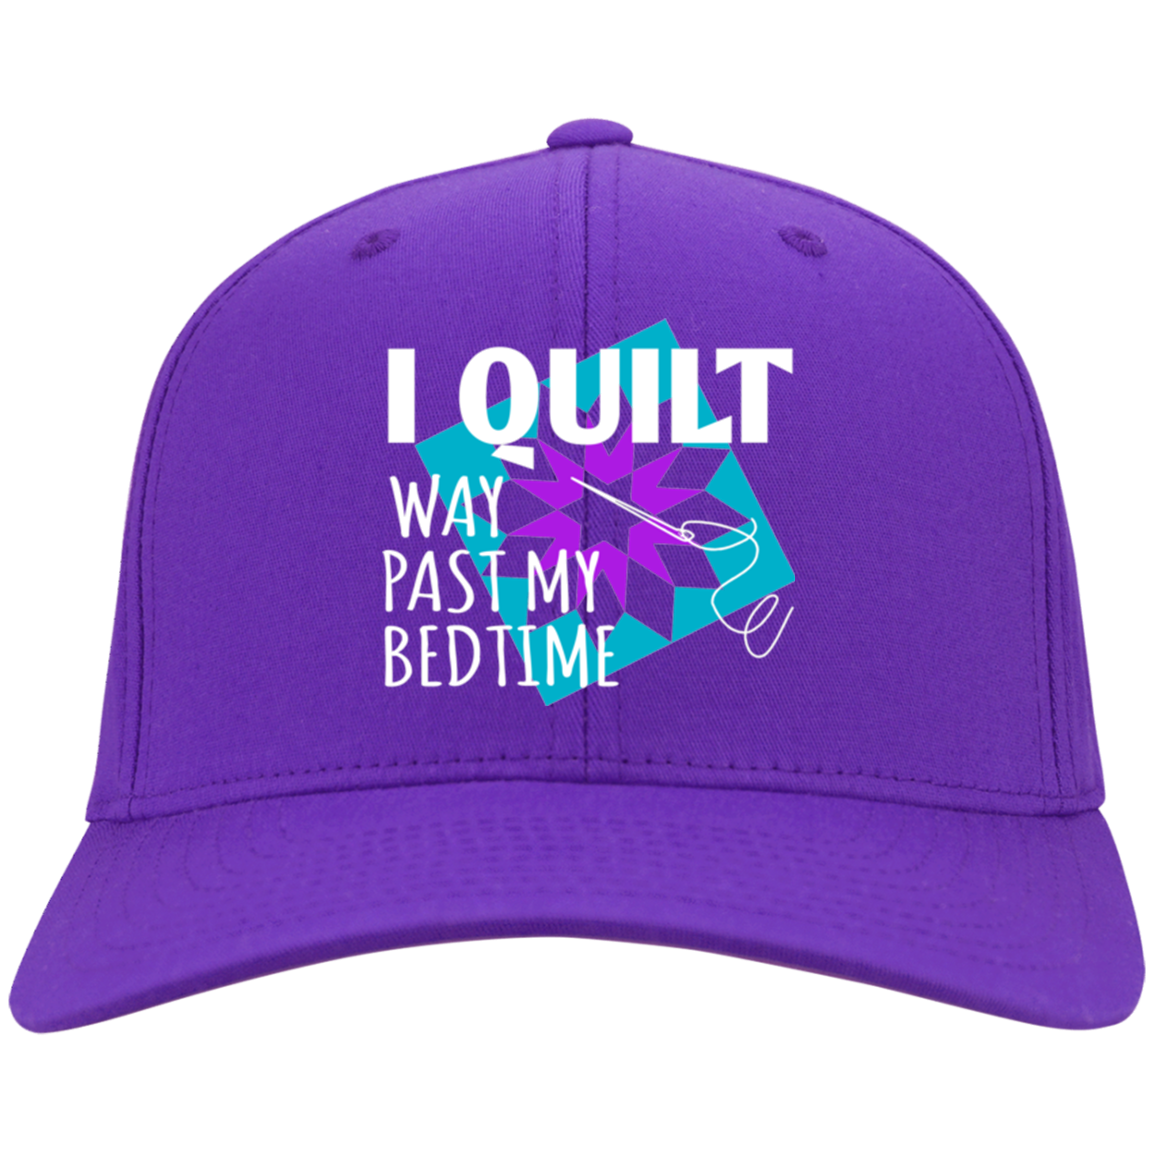 I Quilt Way Past My Bedtime Twill Cap